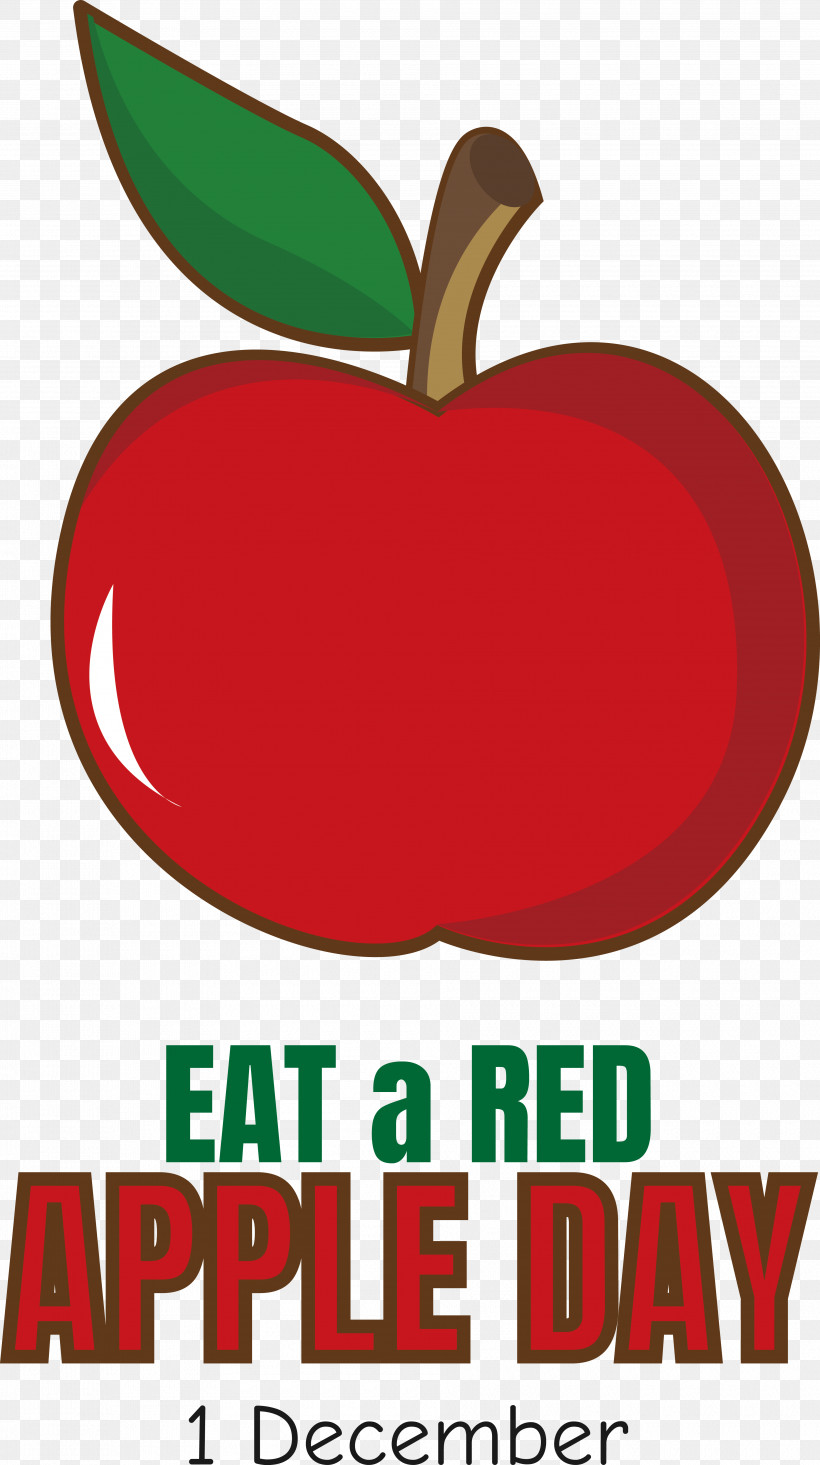 Eat A Red Apple Day Red Apple Fruit, PNG, 3770x6740px, Eat A Red Apple Day, Fruit, Red Apple Download Free